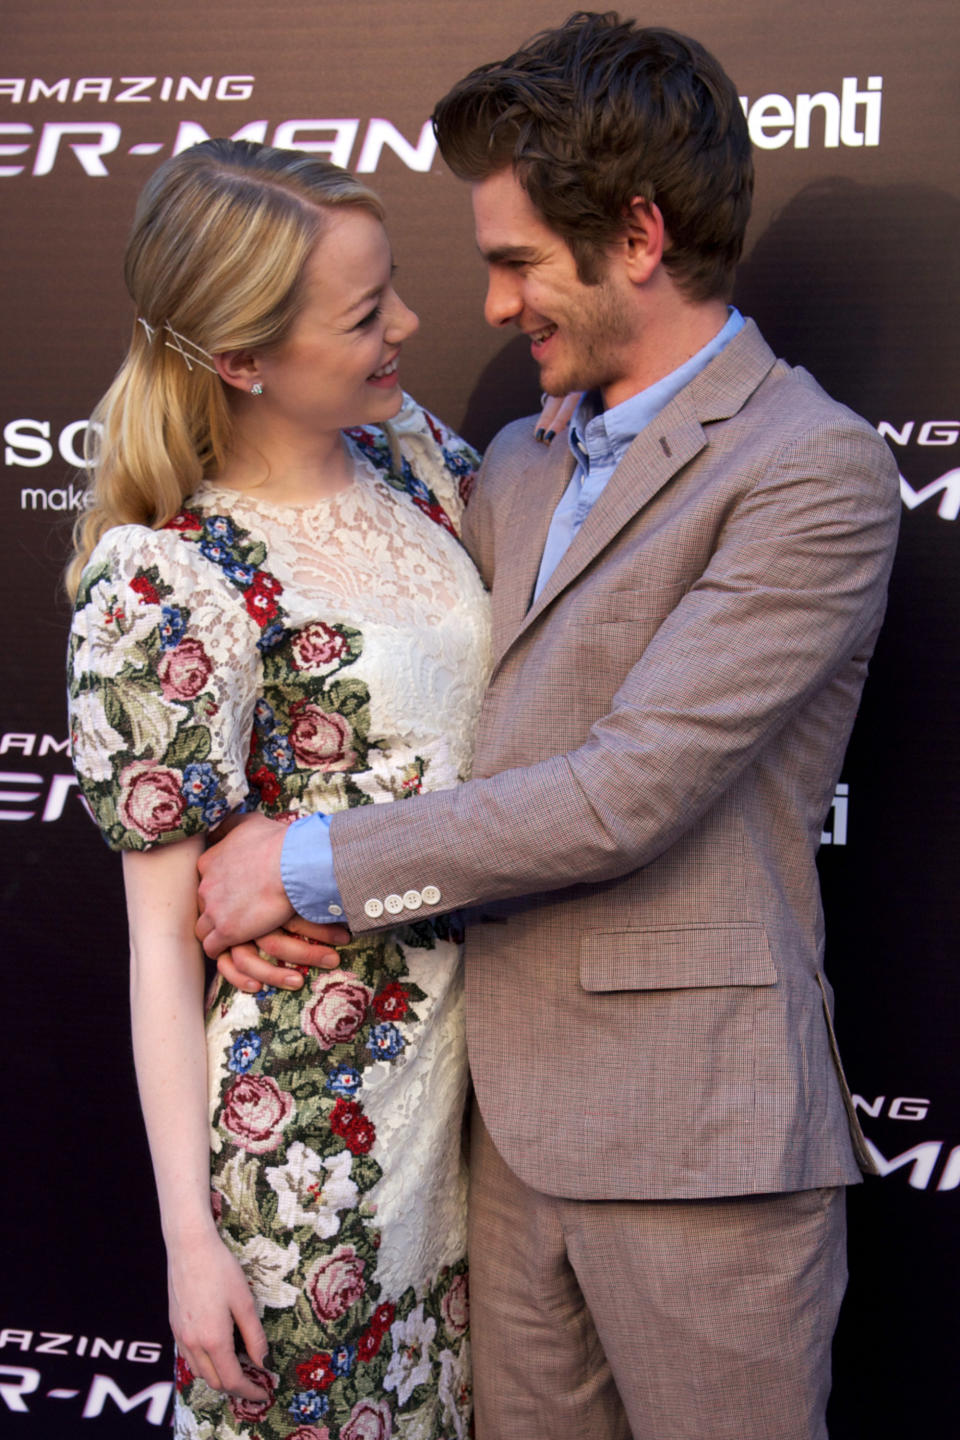 MADRID, SPAIN - JUNE 21: Actor Andrew Garfield and actress Emma Stone attend "The Amazing Spider-Man" premiere at Callao cinema on June 21, 2012 in Madrid, Spain. (Photo by Carlos Alvarez/Getty Images)